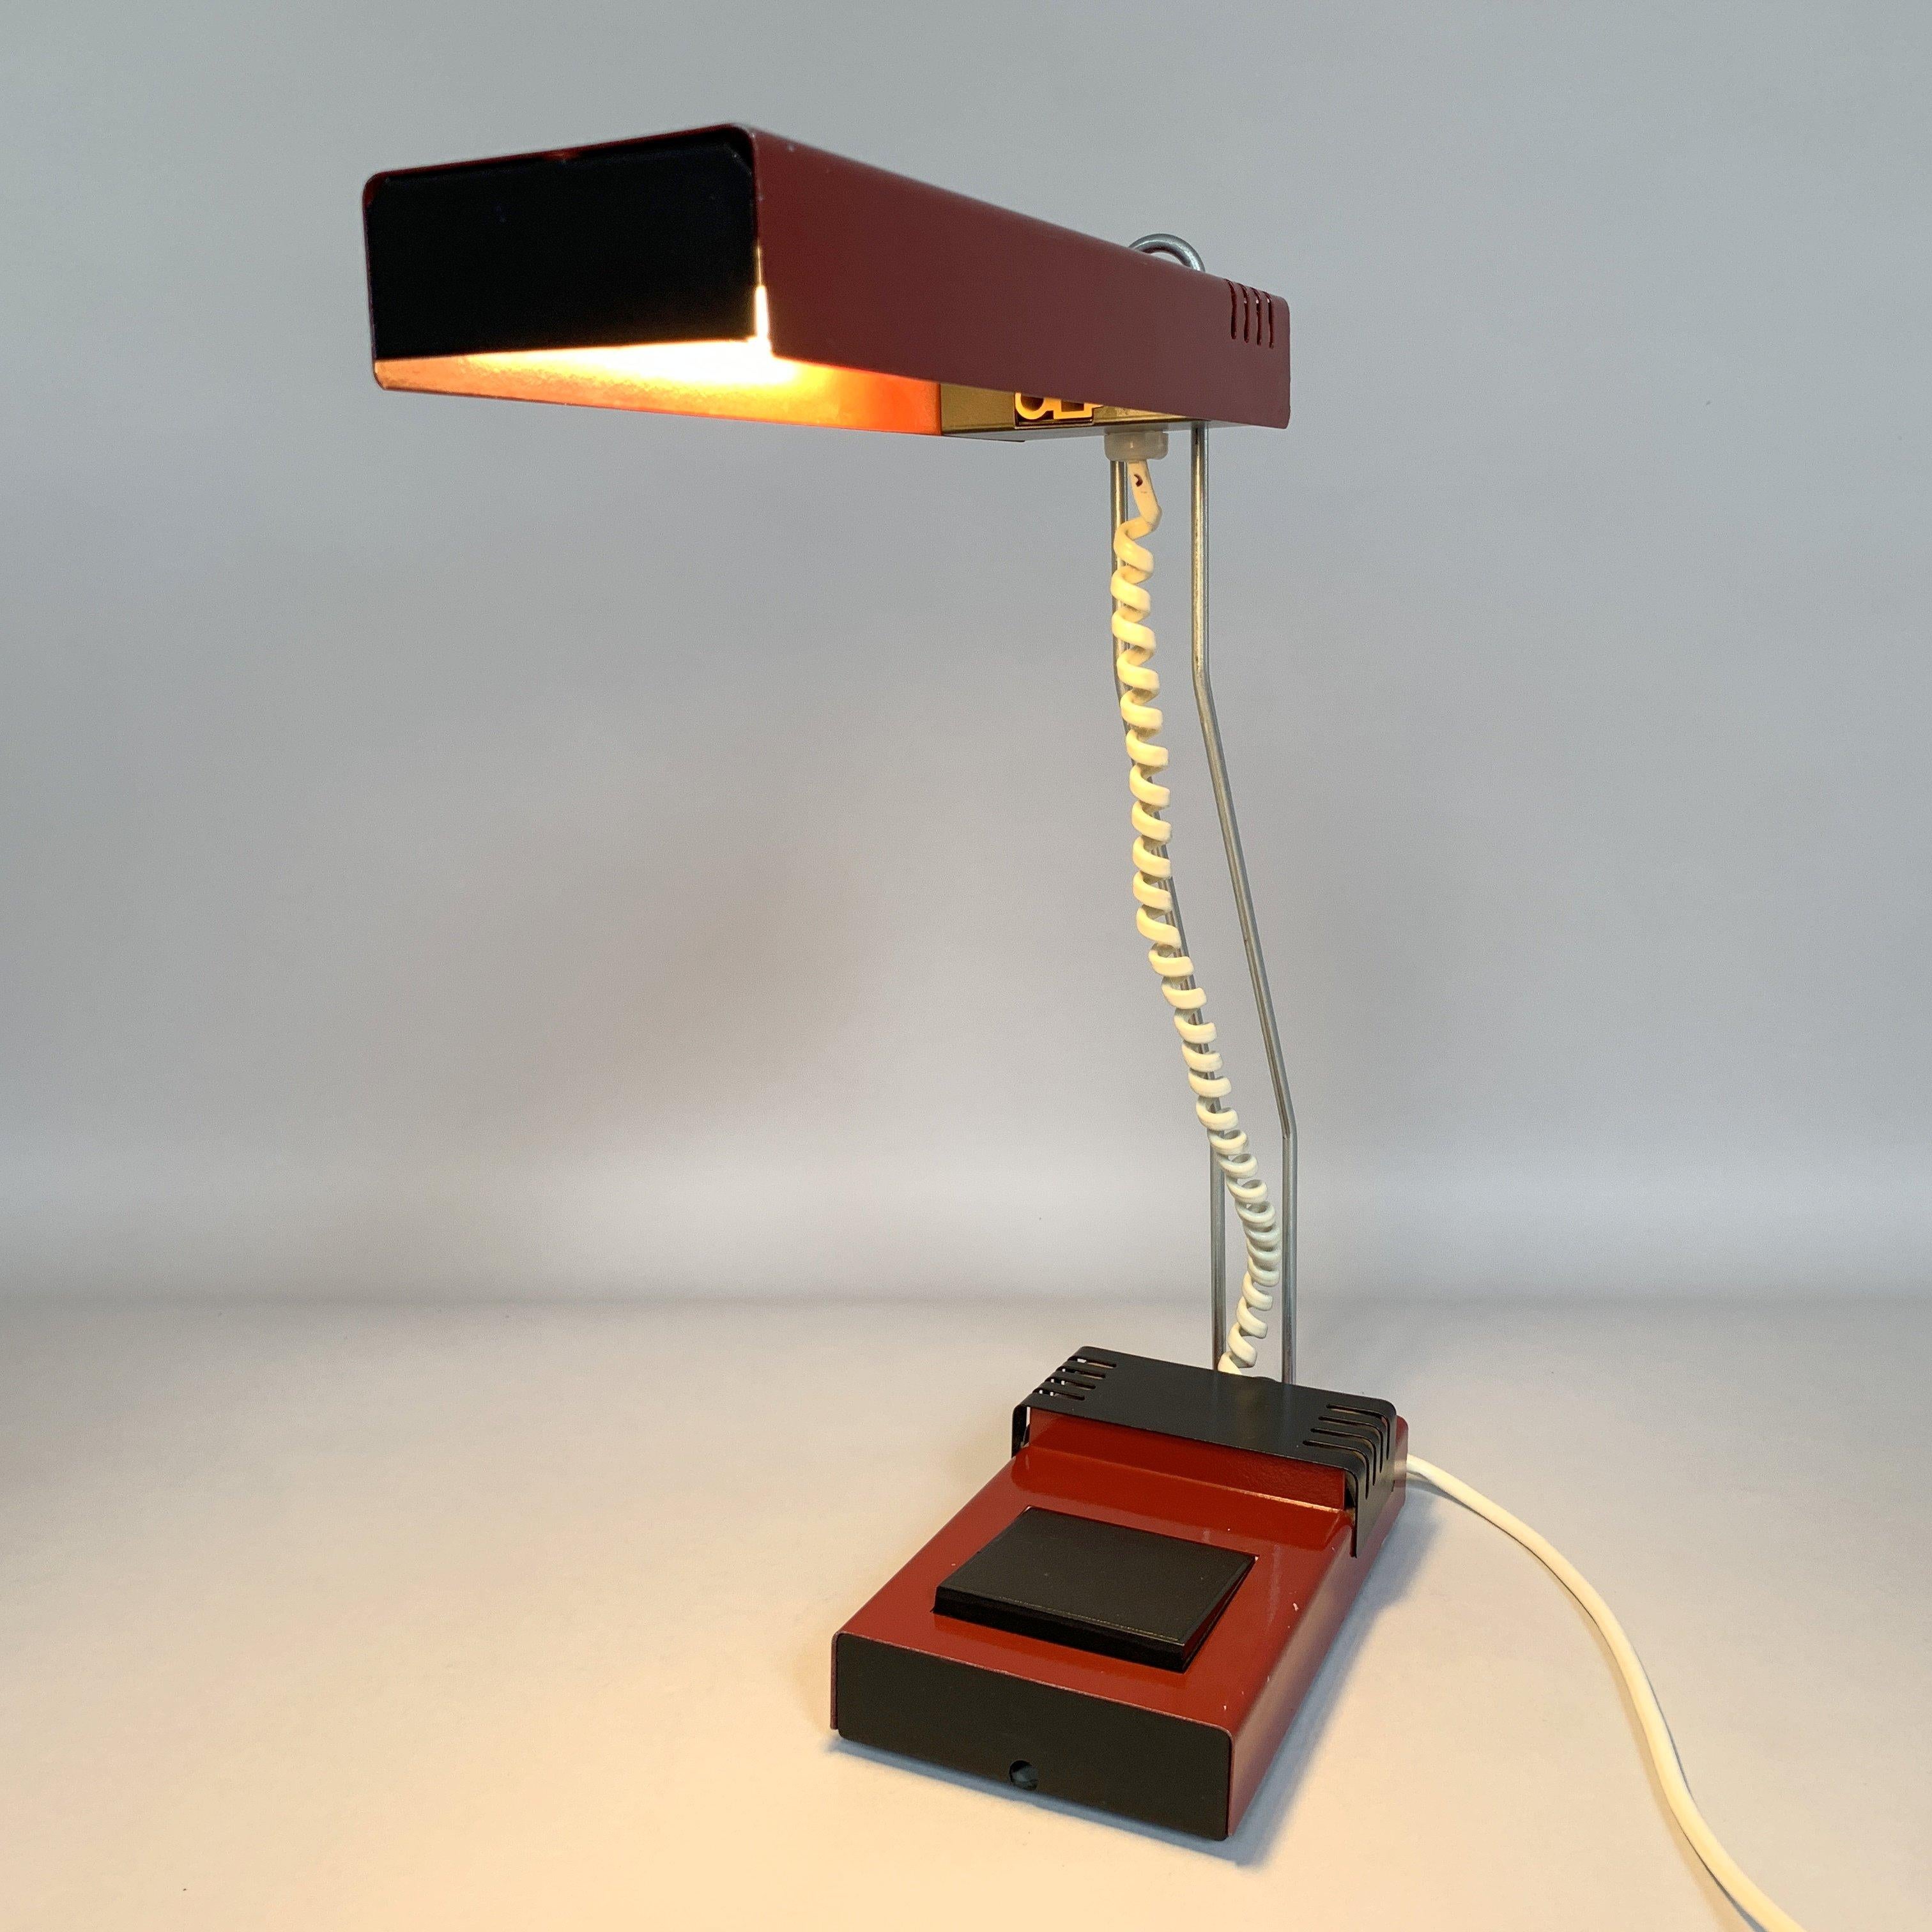 The lamp was made by the manufacturer Kovos Teplice under the designation DZ 9/11 in the second half of the 20th century. The author of the design is Josef Mara, who was the successor of the famous lighting designer Josef Hurka. The lamp is made of